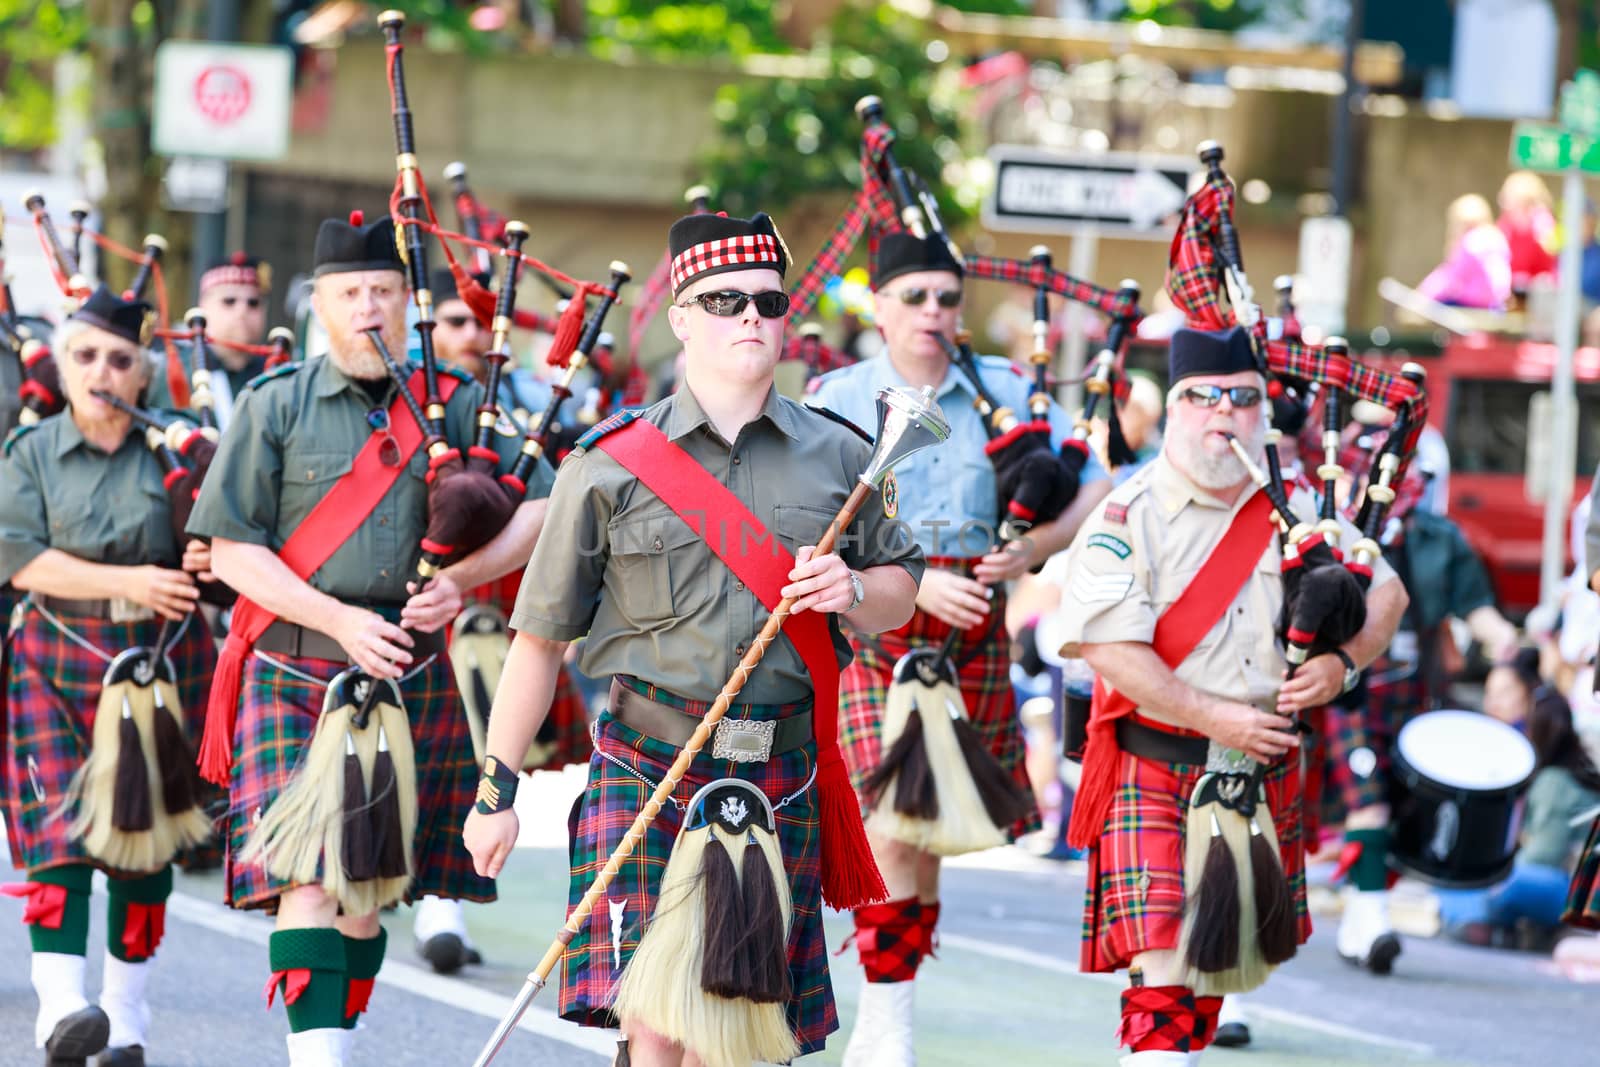 Portland, Oregon, USA - JUNE 7, 2014: Clan Macleay Pipe Band in Grand floral parade through Portland downtown.